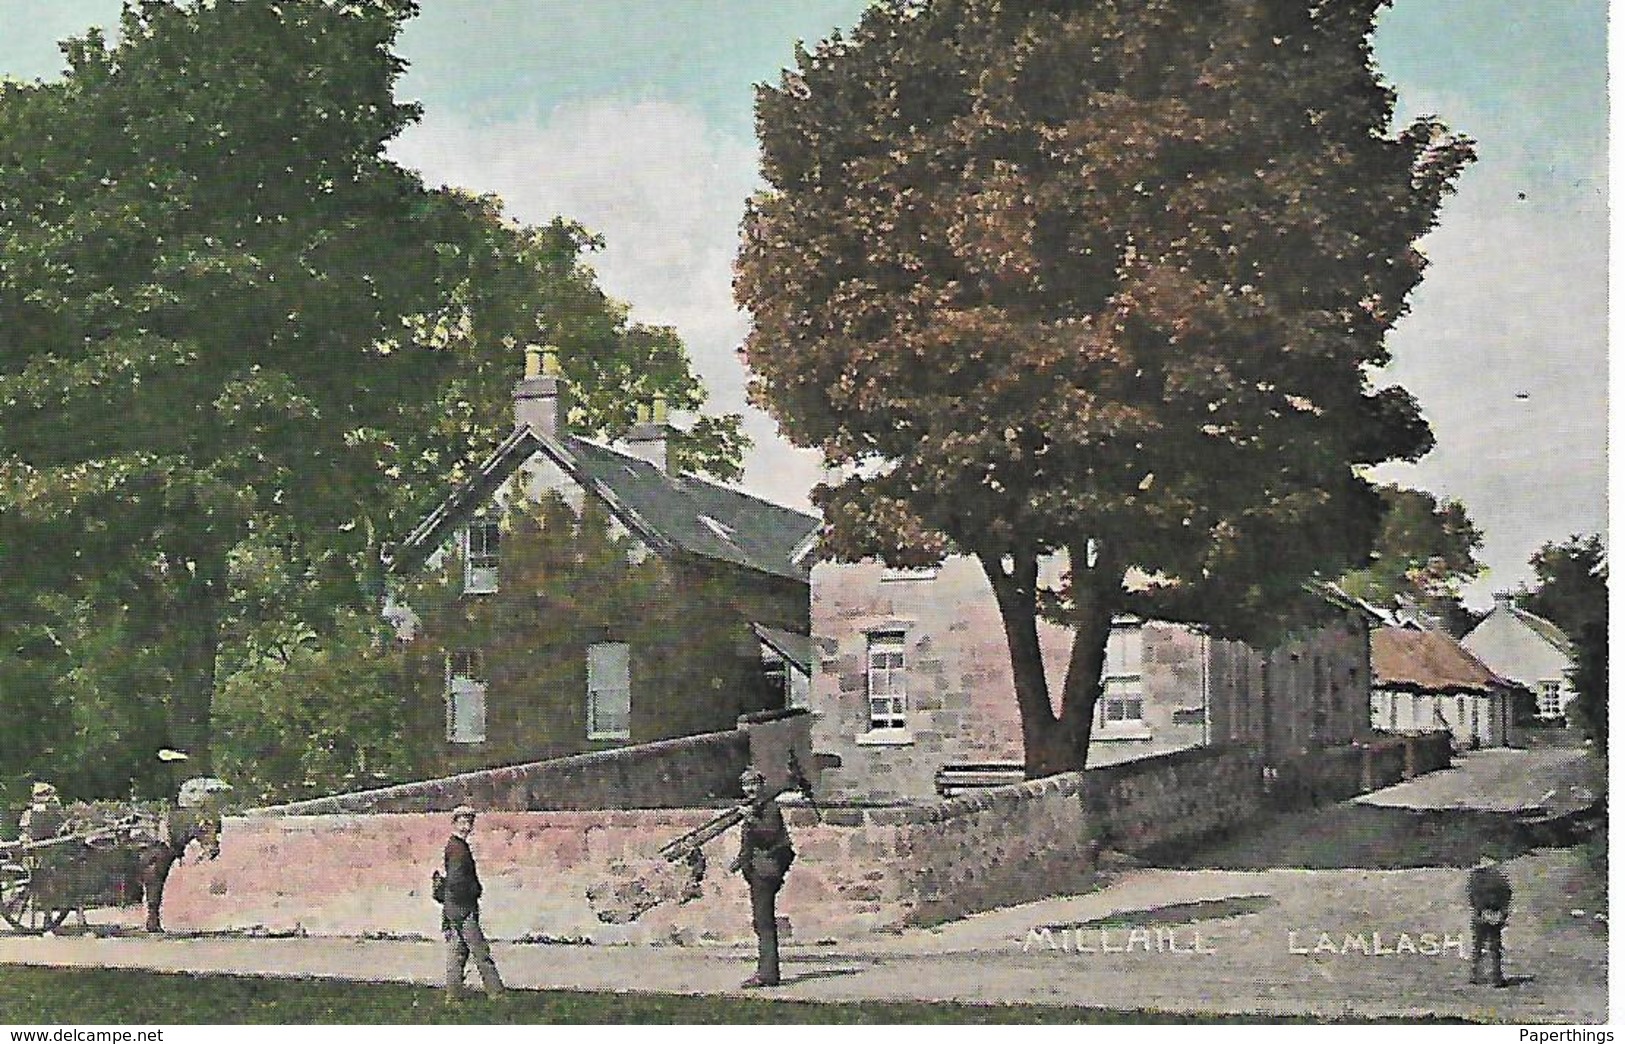 Old Colour Postcard, Scotland, Isle Of Arran, Firth Of Clyde, Millhill Lamlash. Horse And Cart, Houses. - Bute